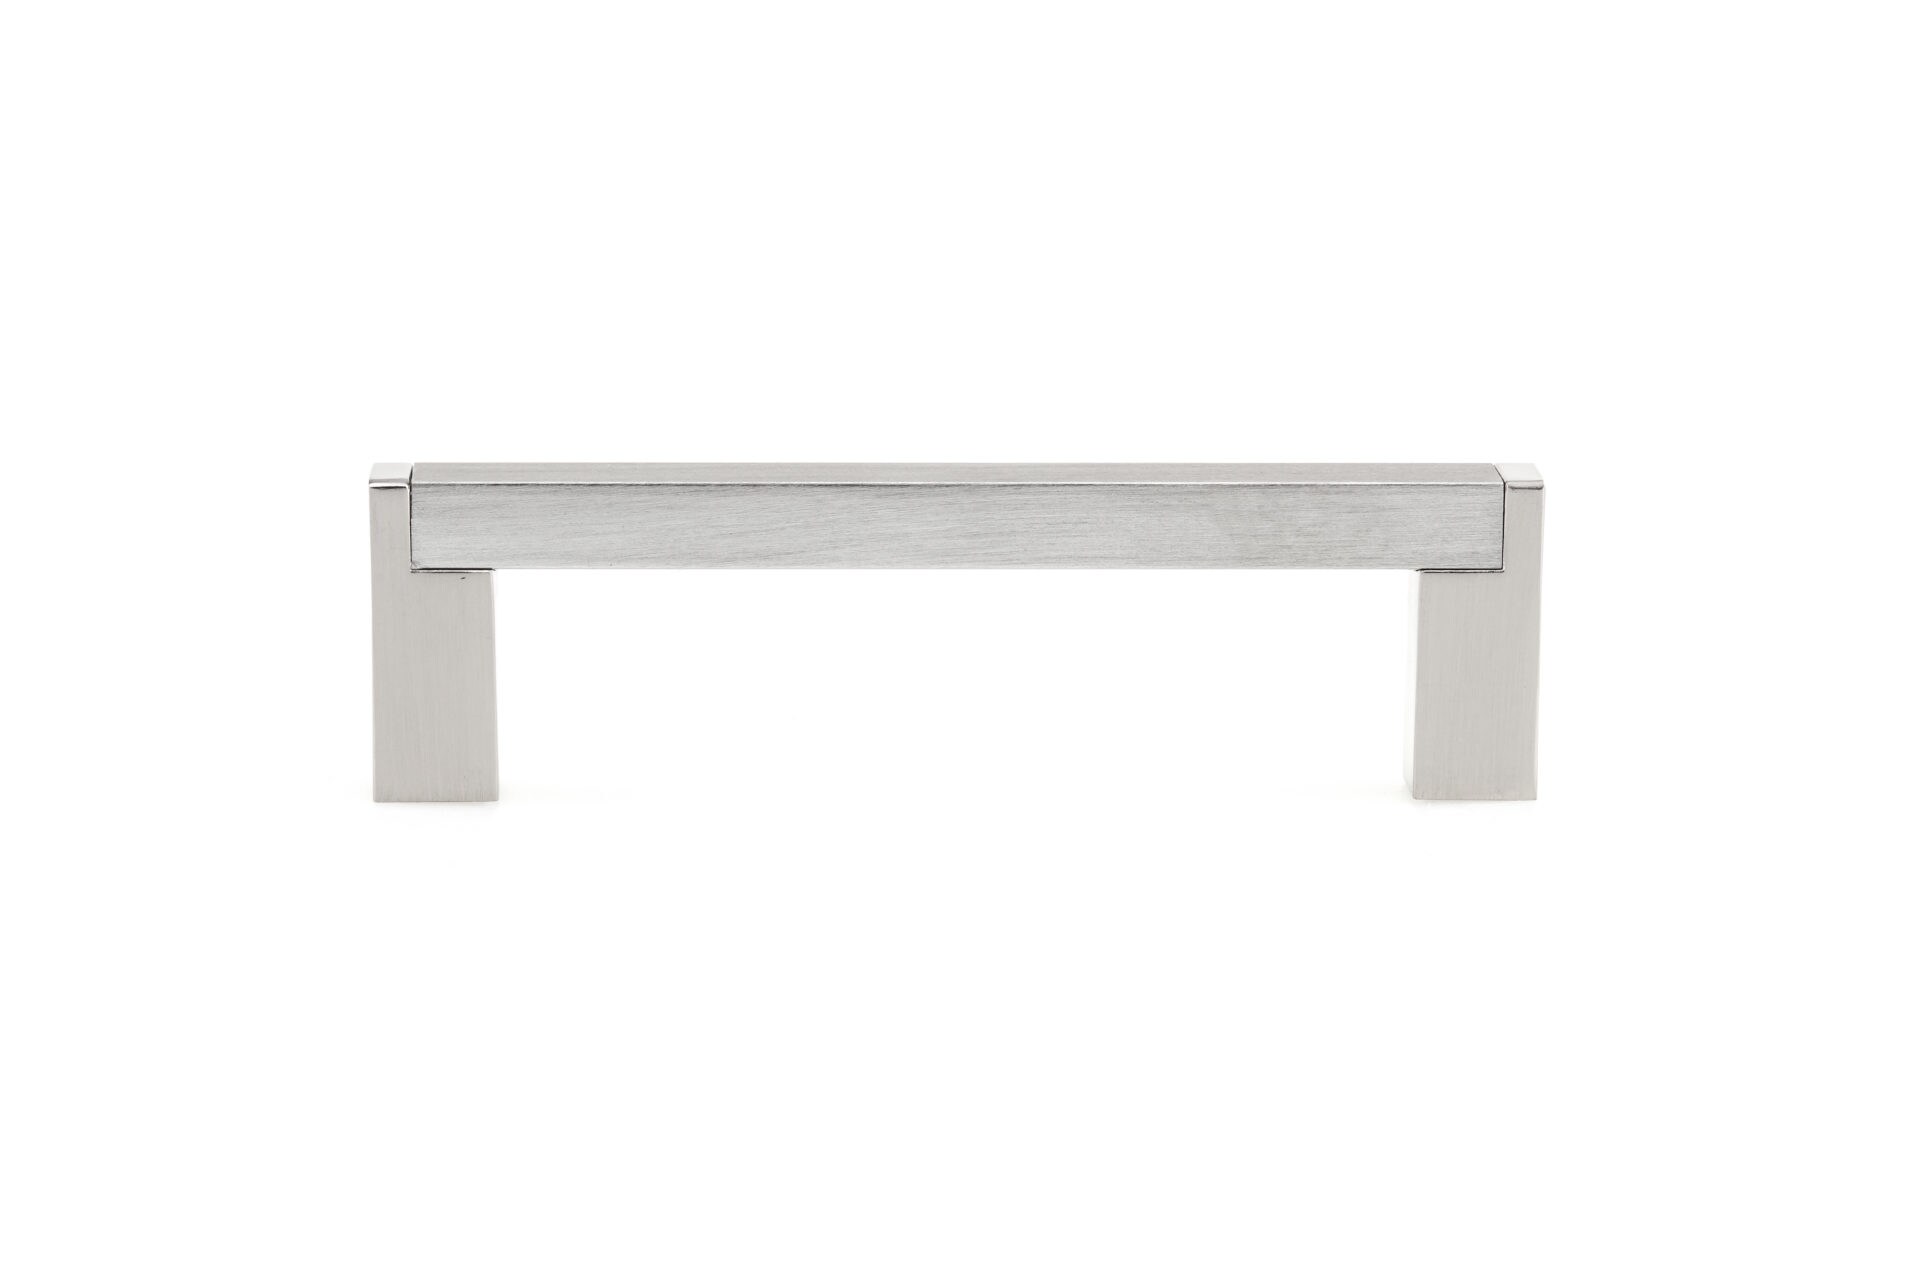 Richelieu Laconia 3-3/4-in Center to Center Brushed Nickel Rectangular ...